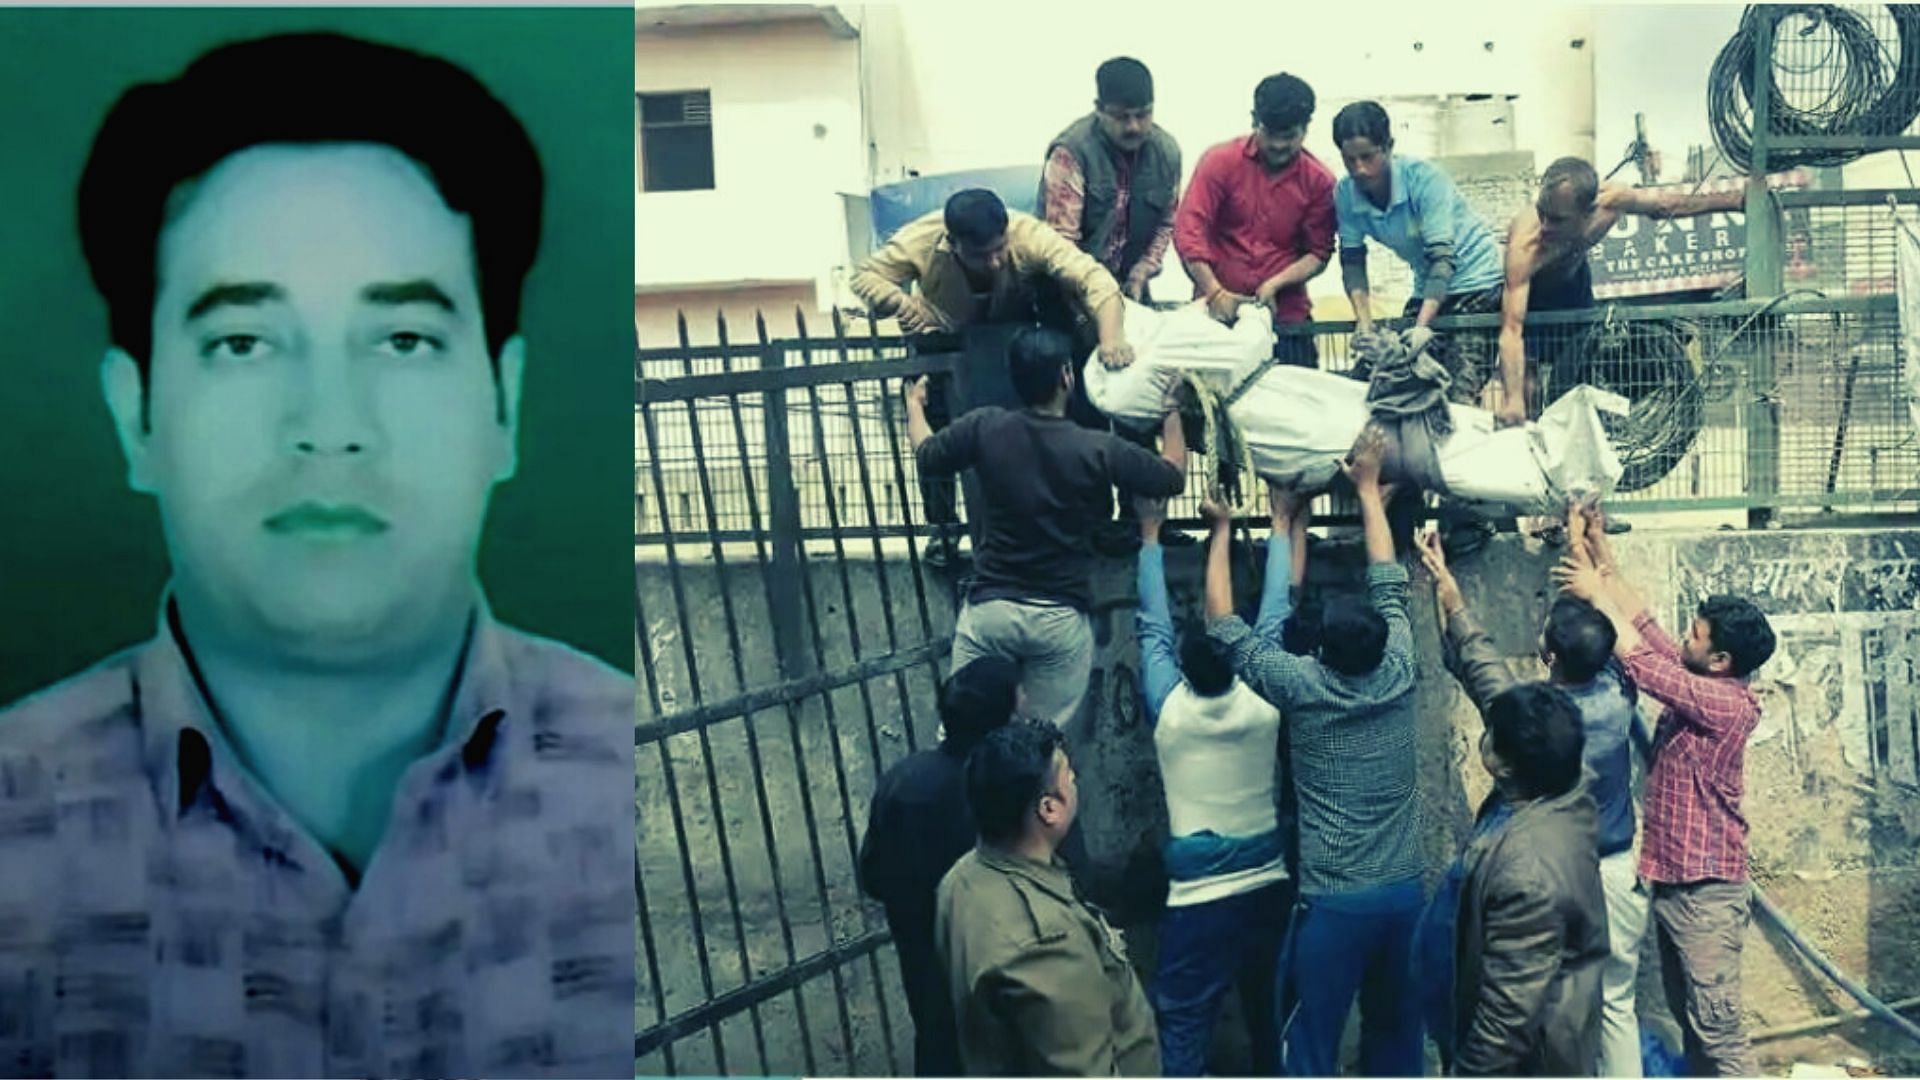 Delhi police filed the charge sheet in IB officer Ankit Sharma’s death. According to it, Ankit Sharma, who had allegedly gone to the spot to calm tensions between was singled out and brutally attacked by the rioters.